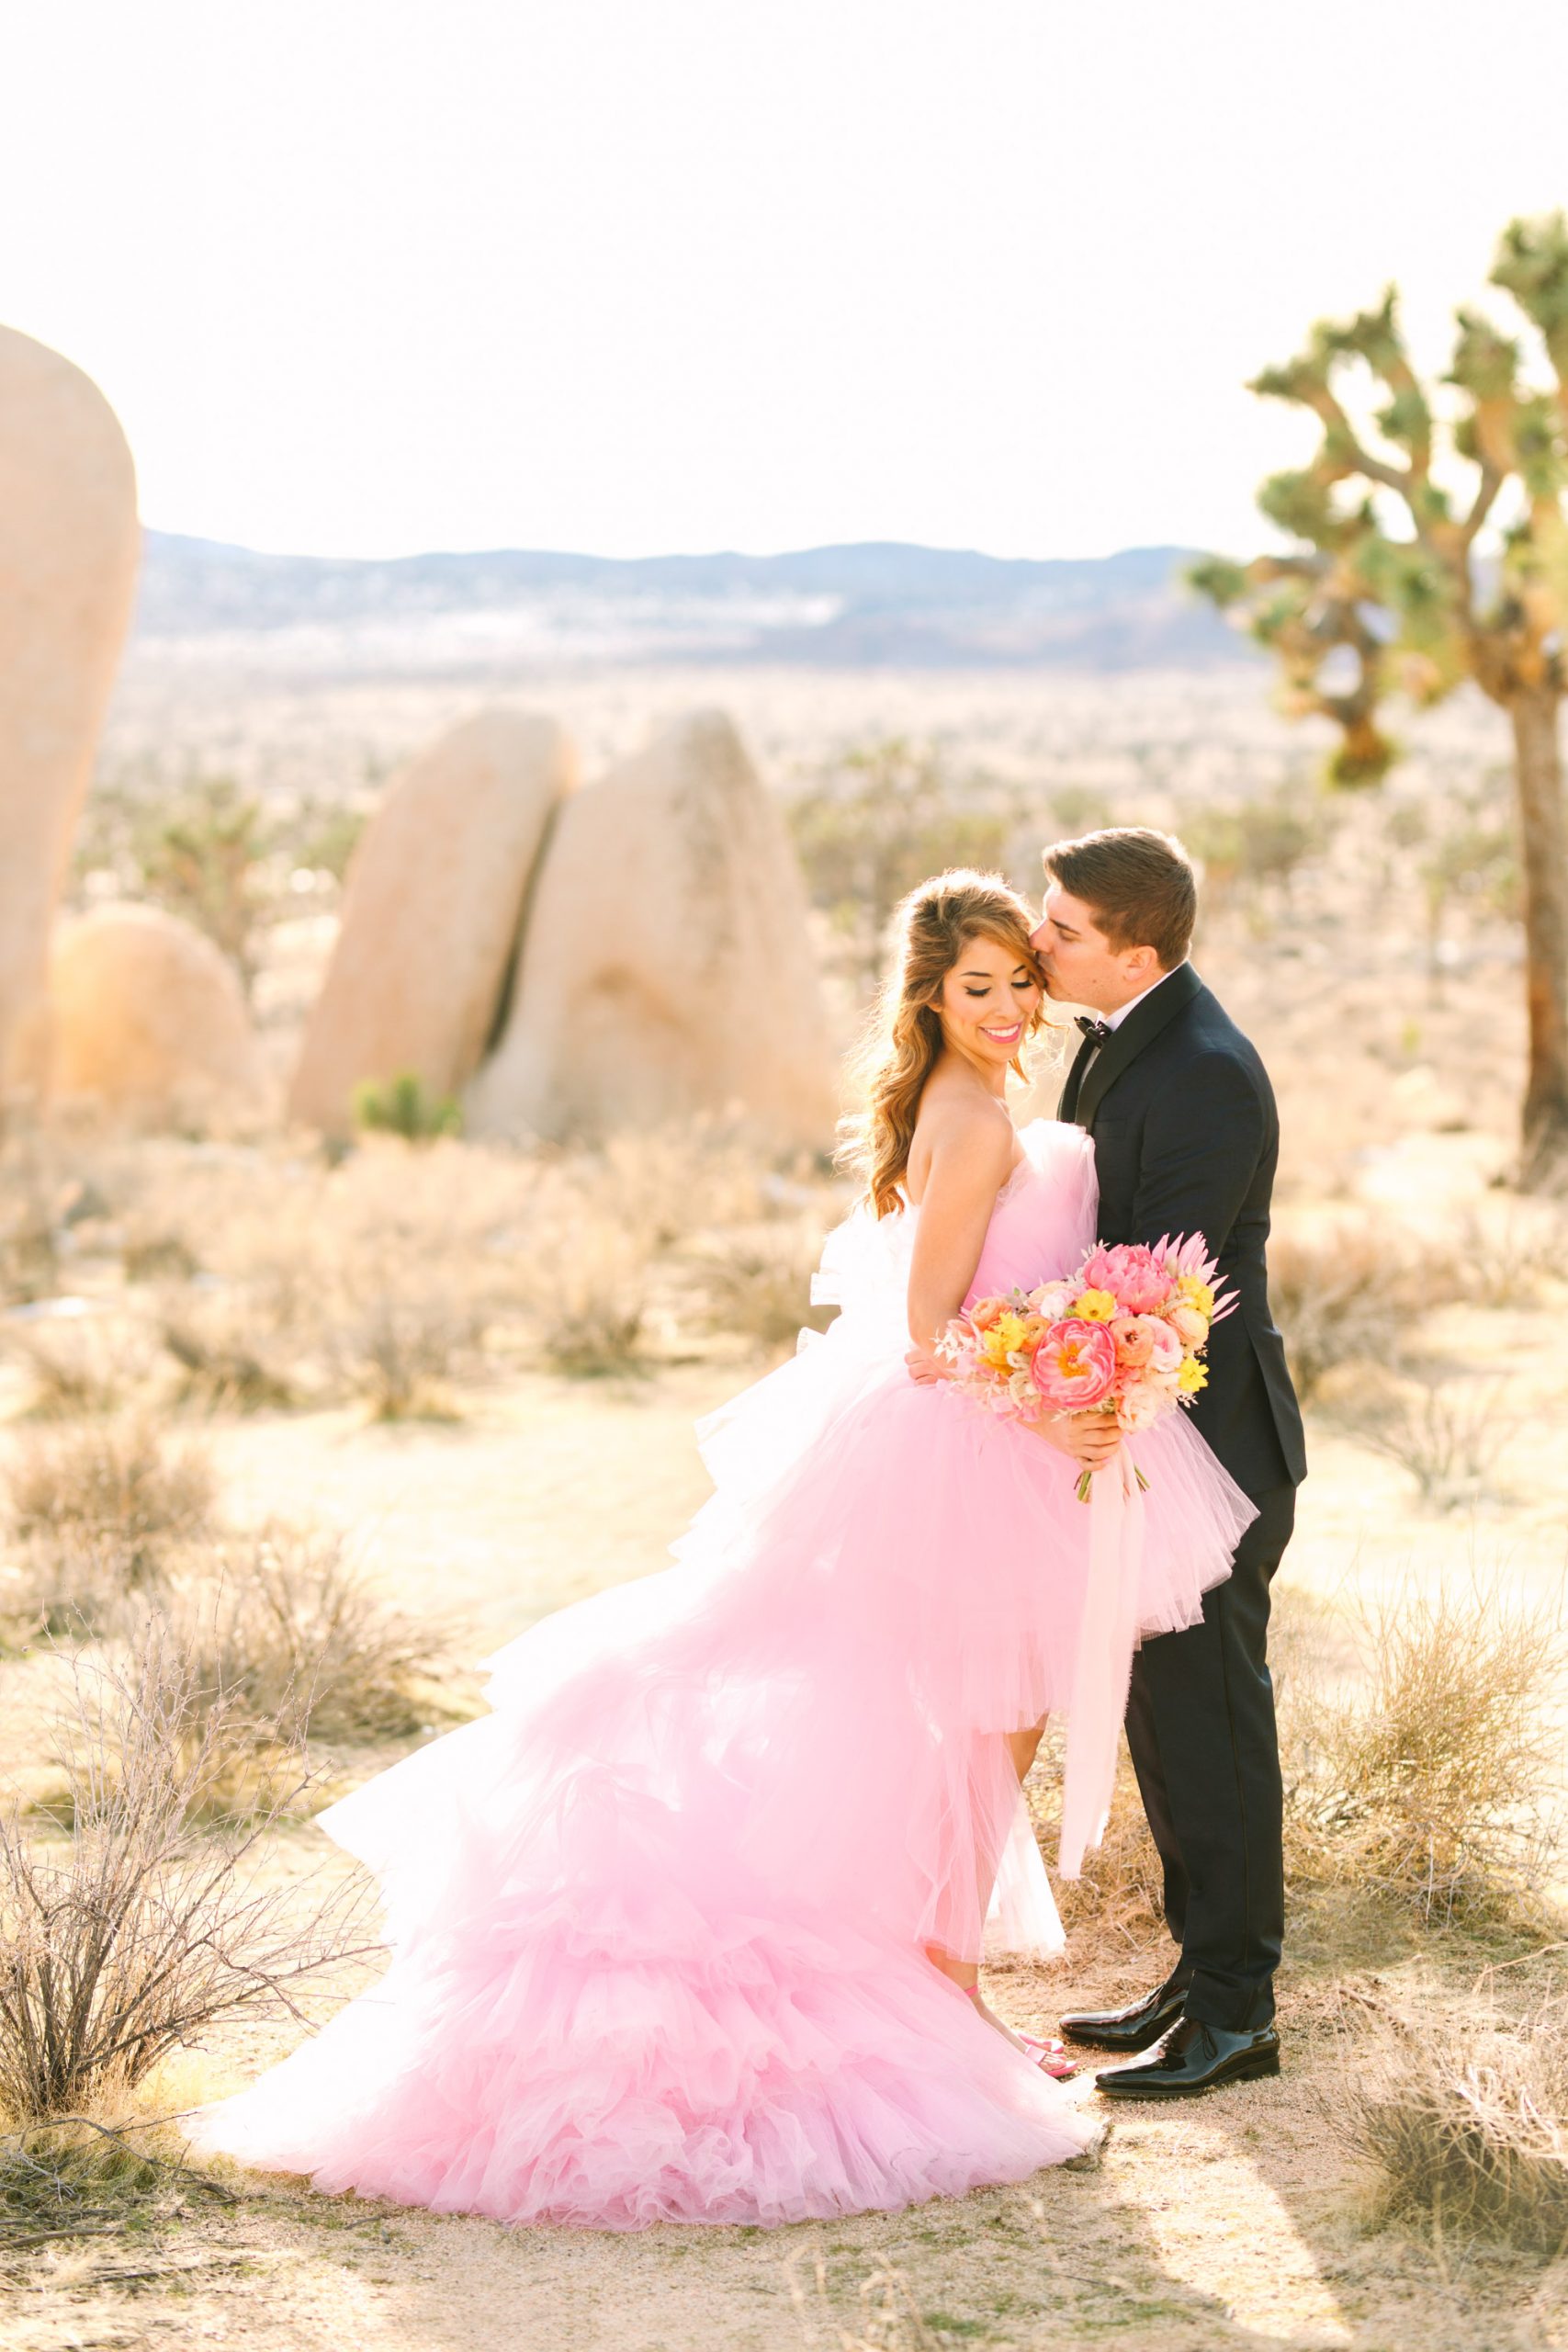 Pink wedding dress Joshua Tree elopement featured on Green Wedding Shoes | Vibrant and elevated wedding photos for fun-loving couples in Southern California #joshuatreewedding #joshuatreeelopement #pinkwedding #greenweddingshoes Source: Mary Costa Photography | Los Angeles